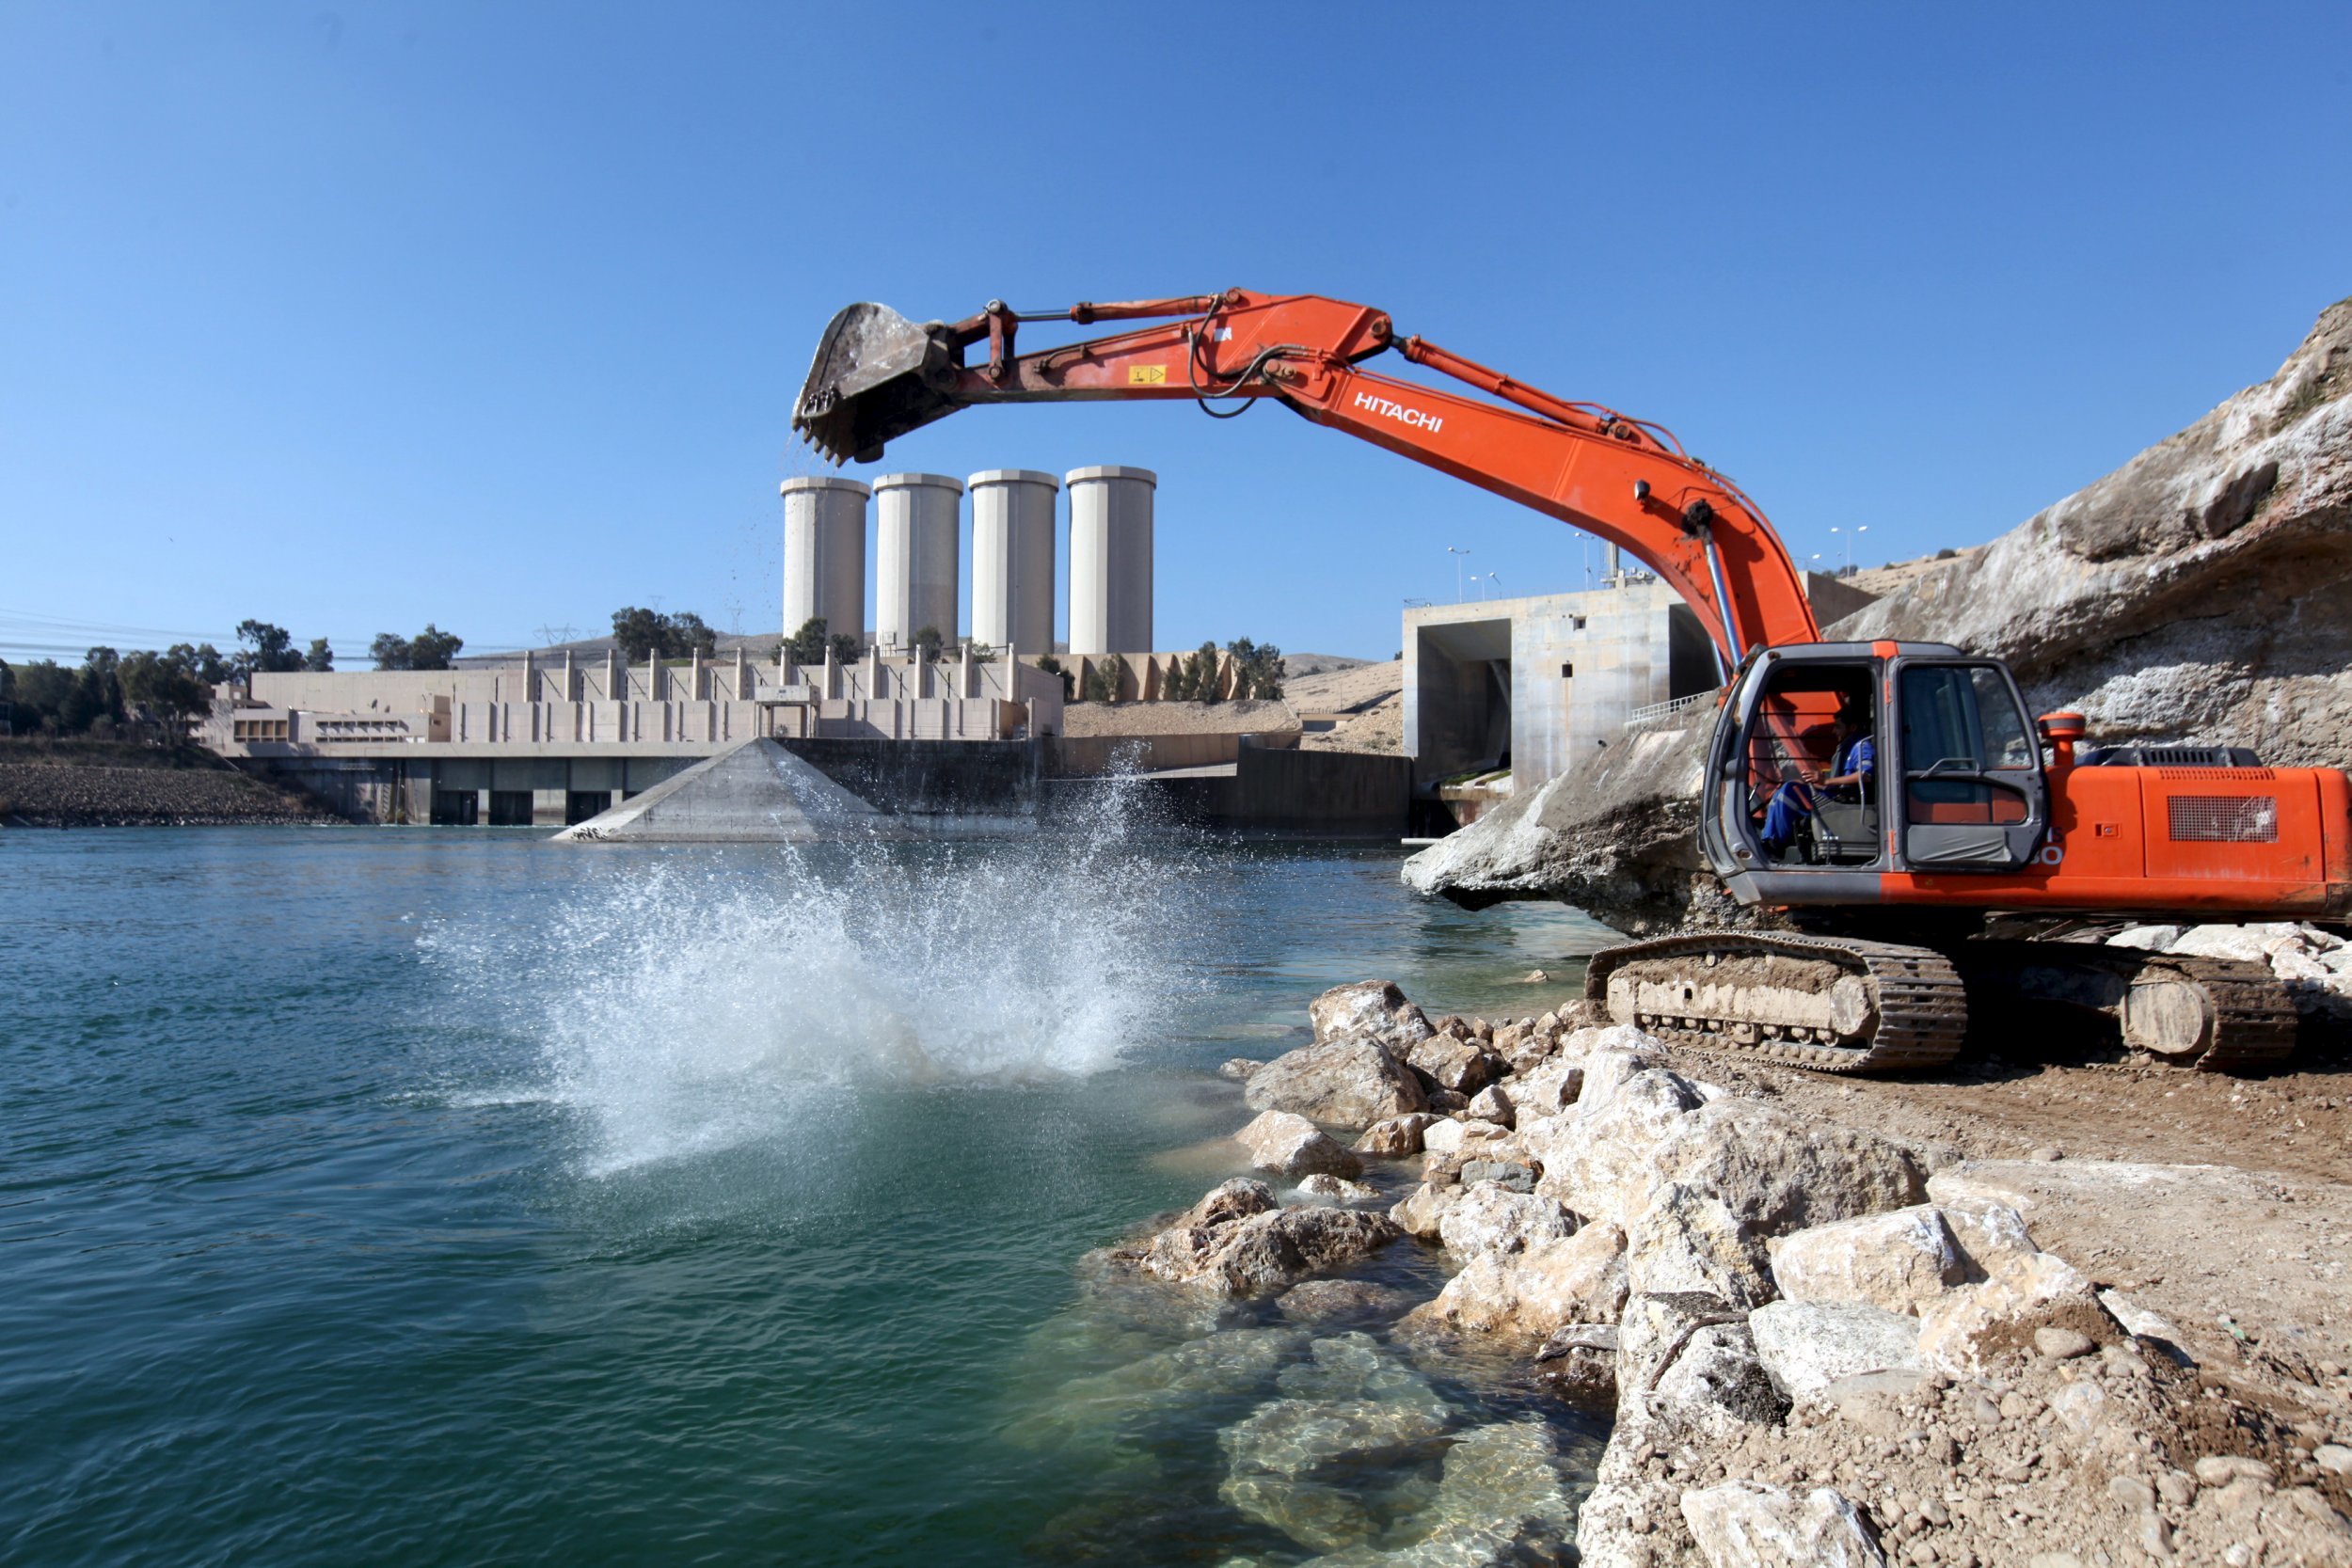 Building crew digs into the Tigris river above the dam